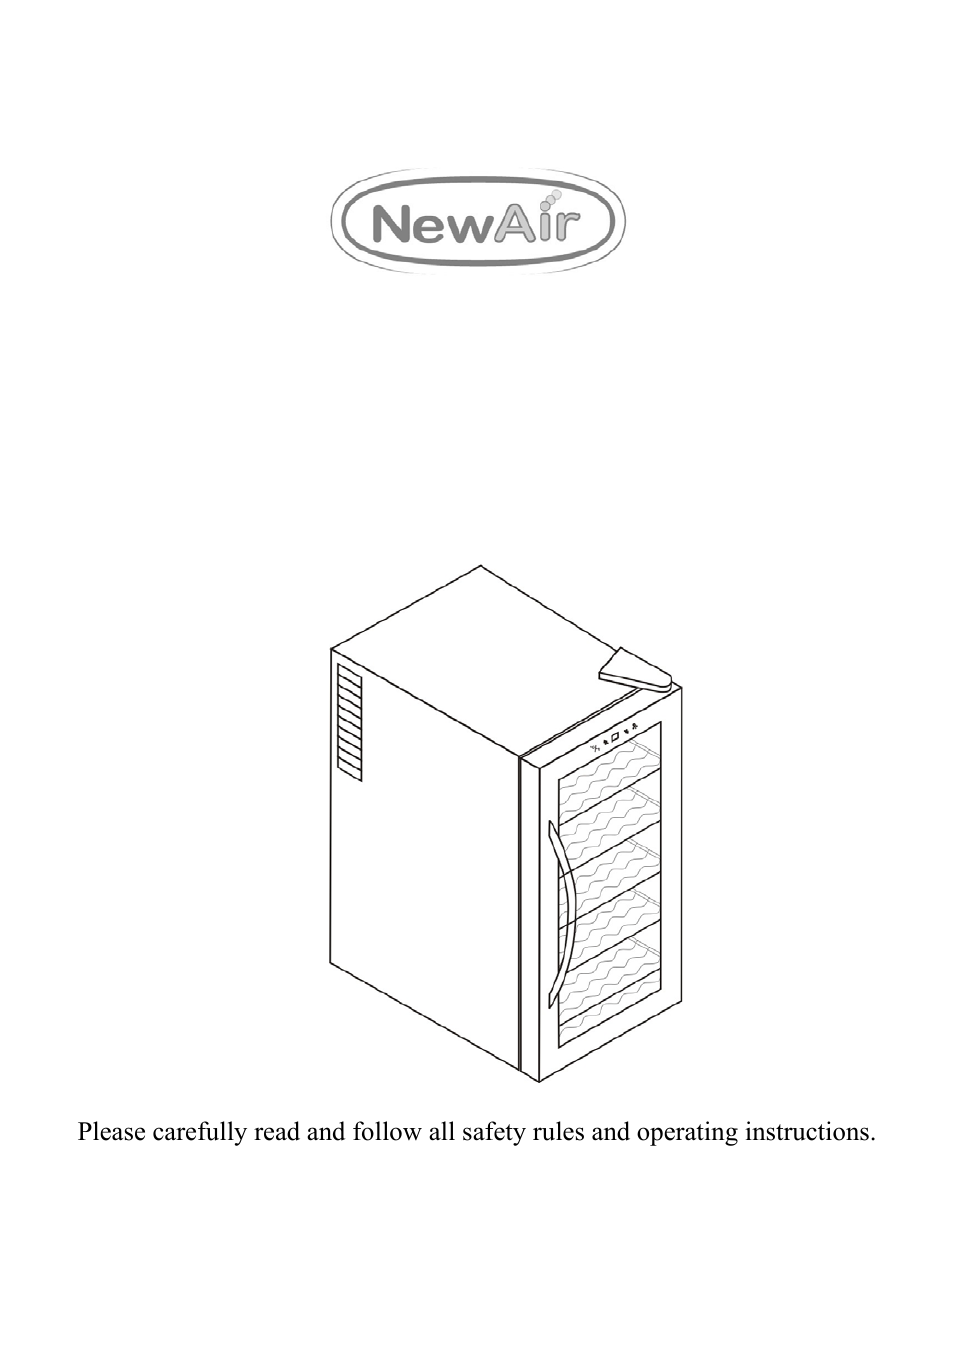 NewAir Thermoelectric Wine Cooler AW-180E User Manual | 5 pages